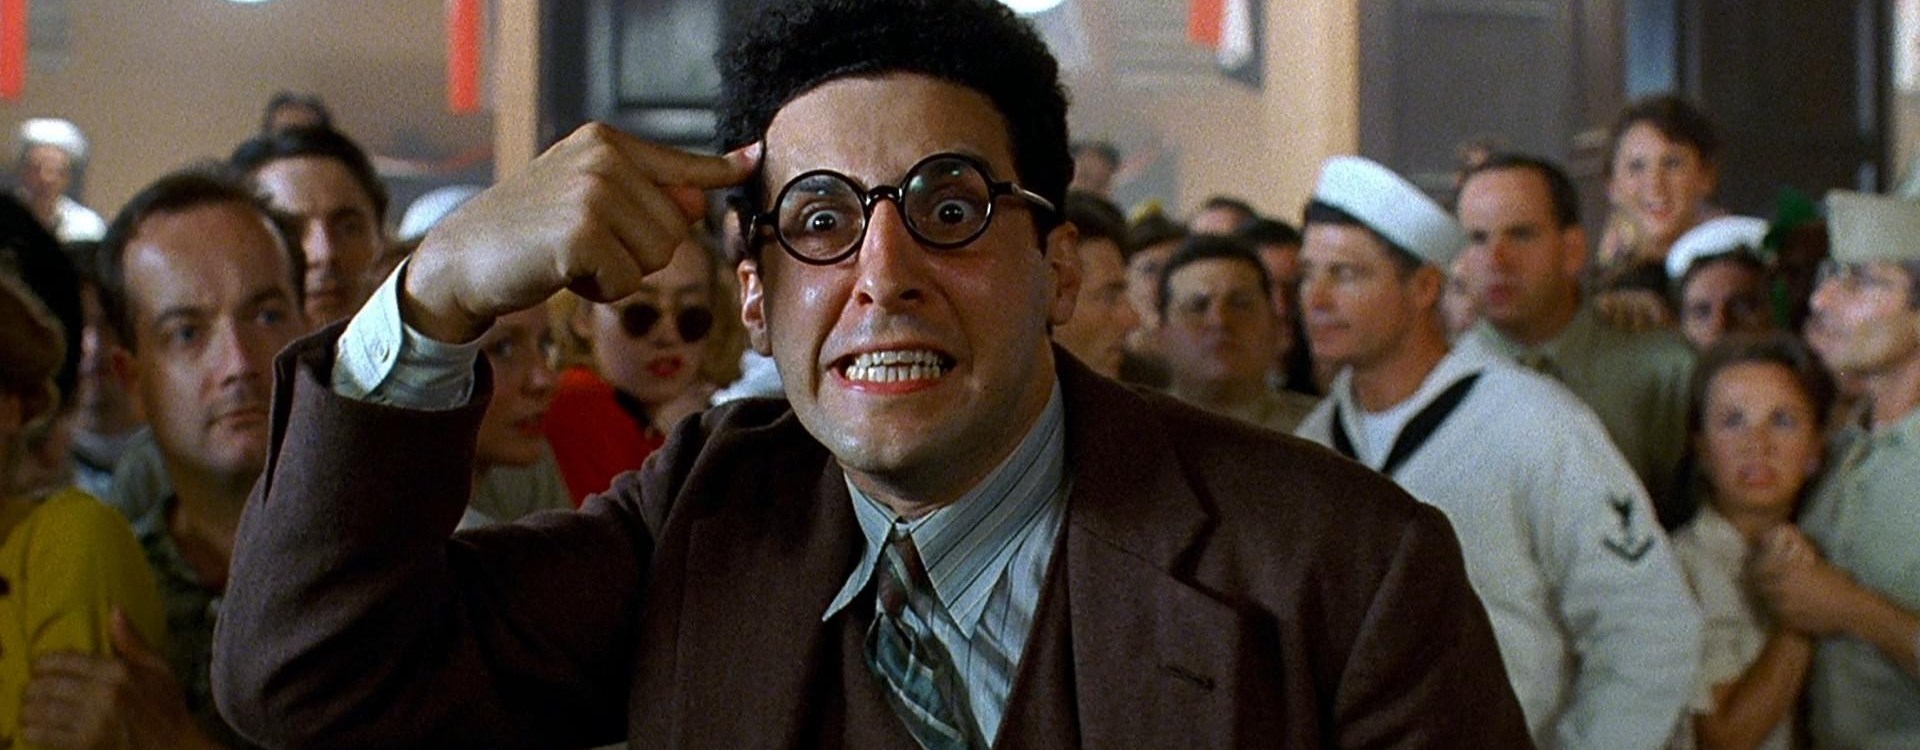 Barton Fink's 30th Anniversary or How to Deal With Writer's Block